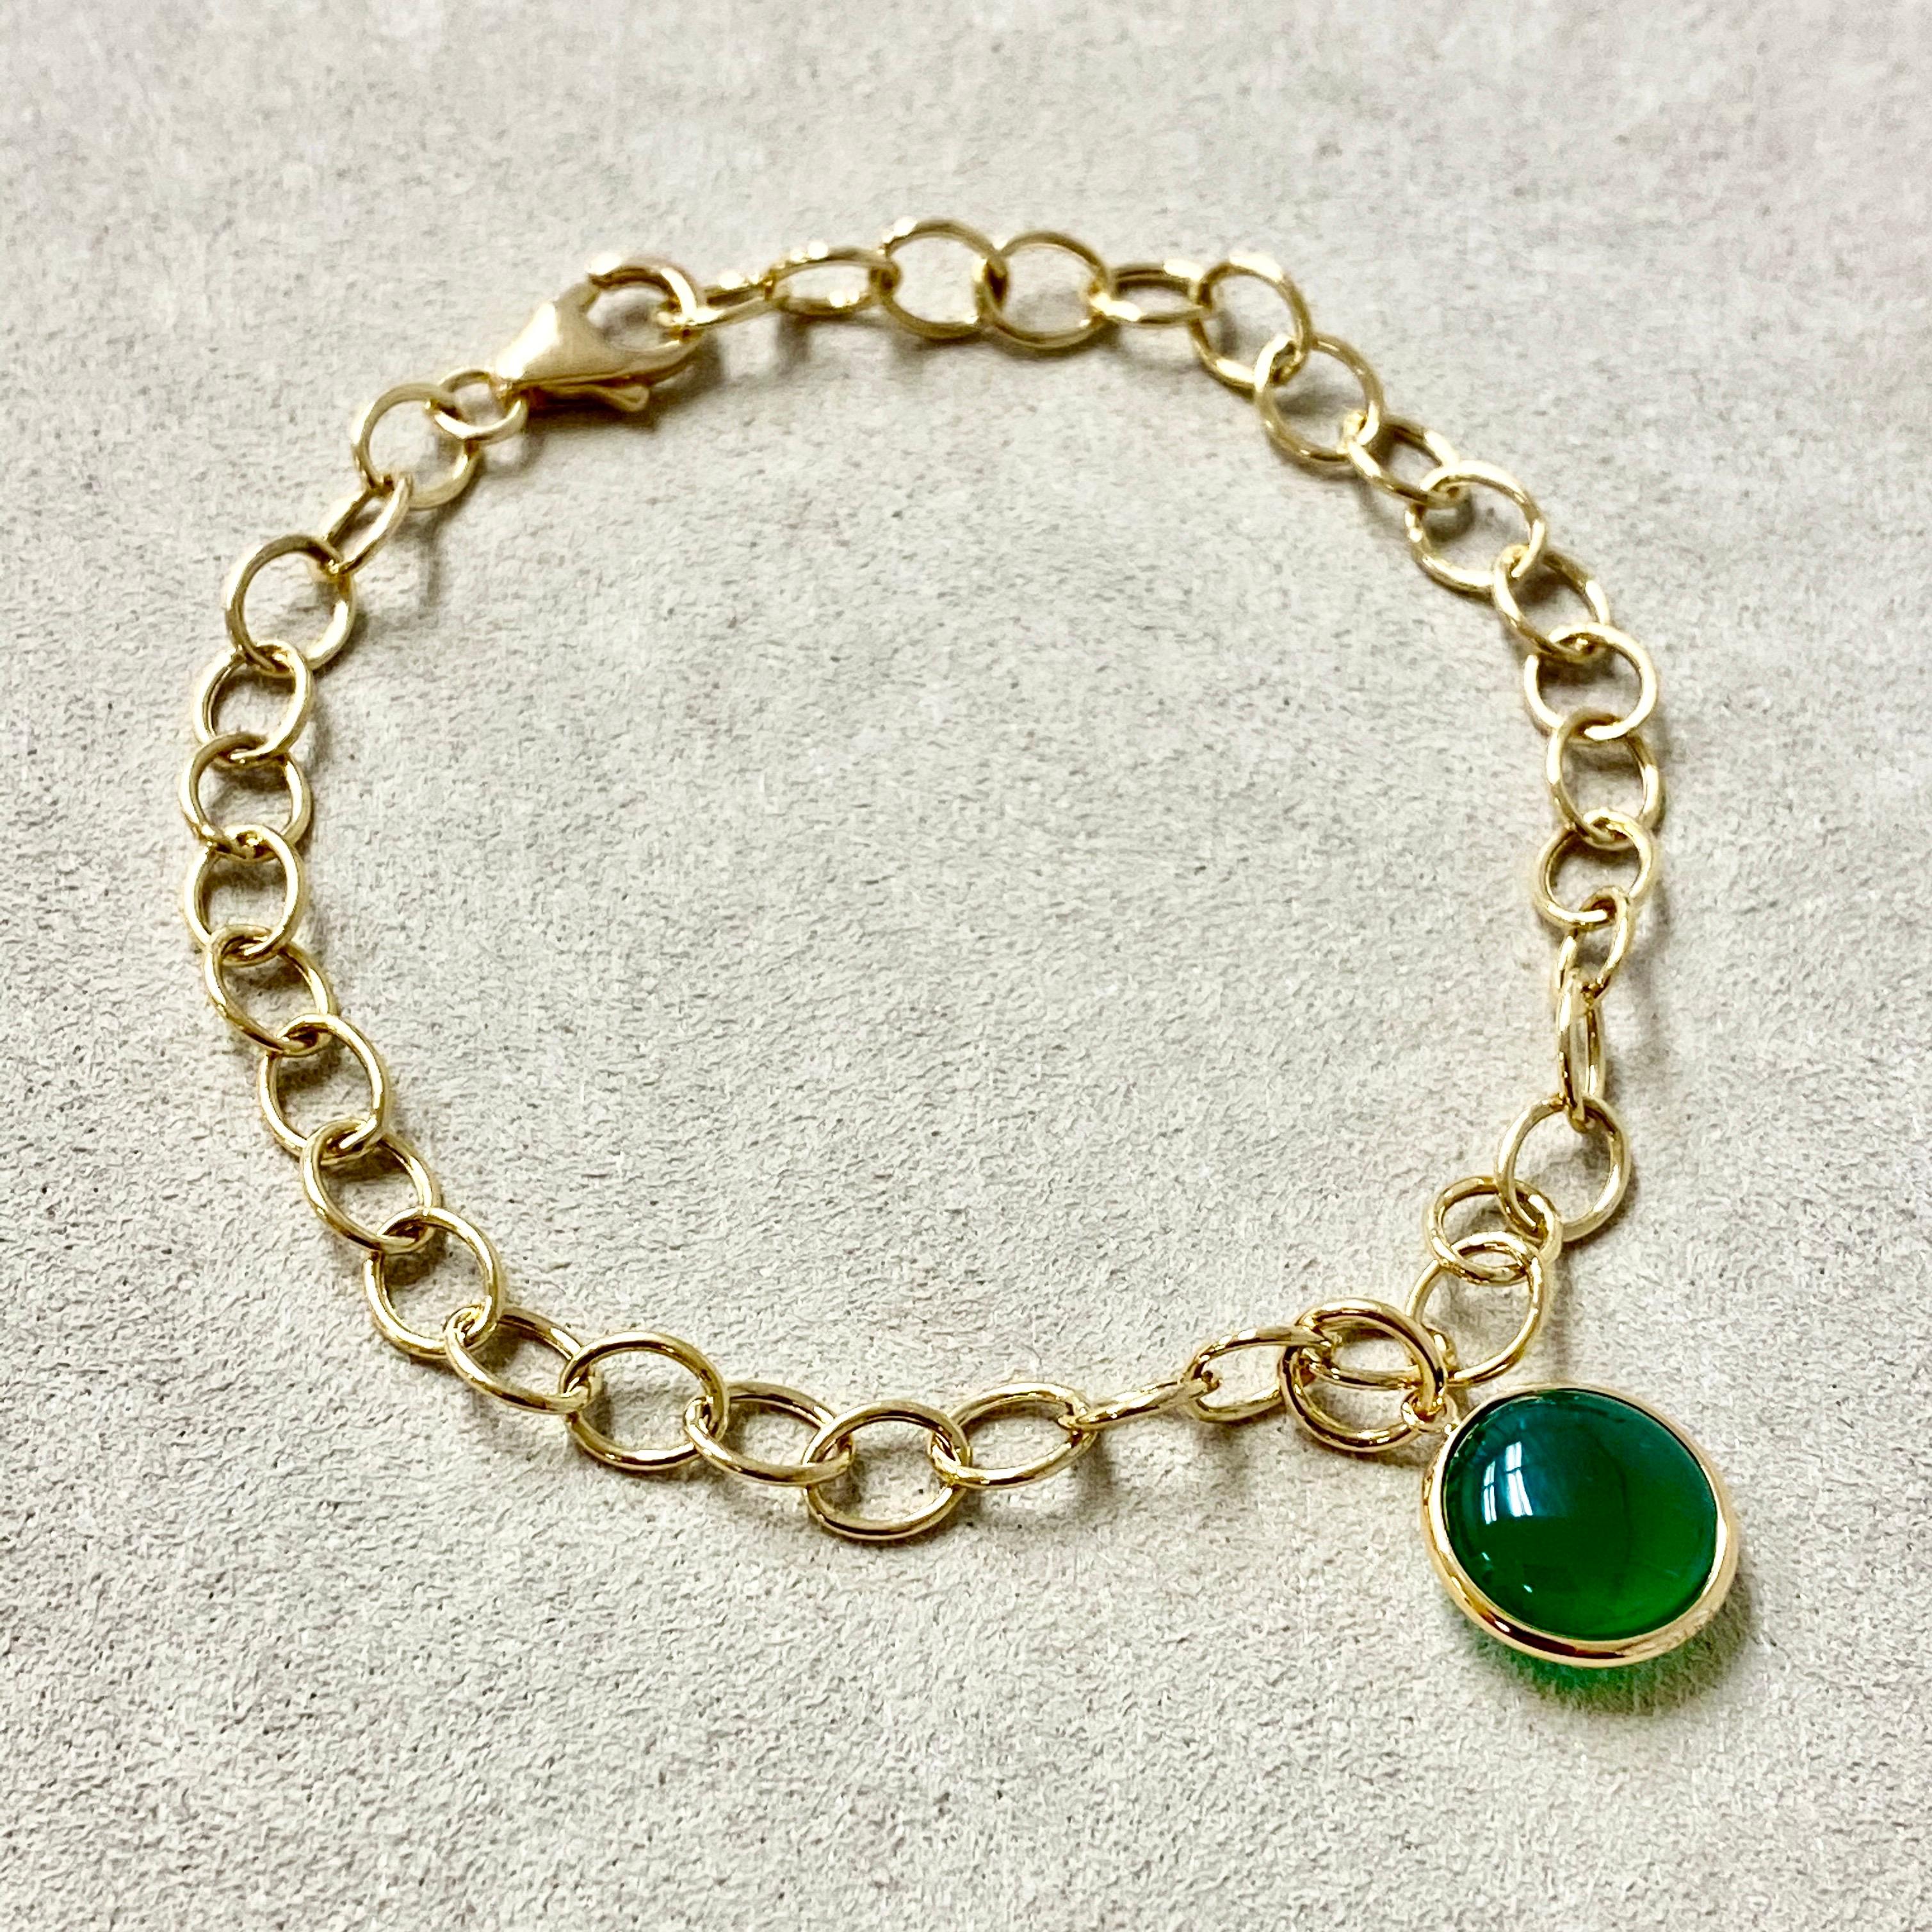 Created in 18 karat yellow gold
Green Chalcedony 3.5 cts approx 
7 inches length with lobster clasp

Infused with 18 karat yellow gold, this bracelet features green Chalcedony of approximately 3.5 carats and measures 7 inches in length along with a